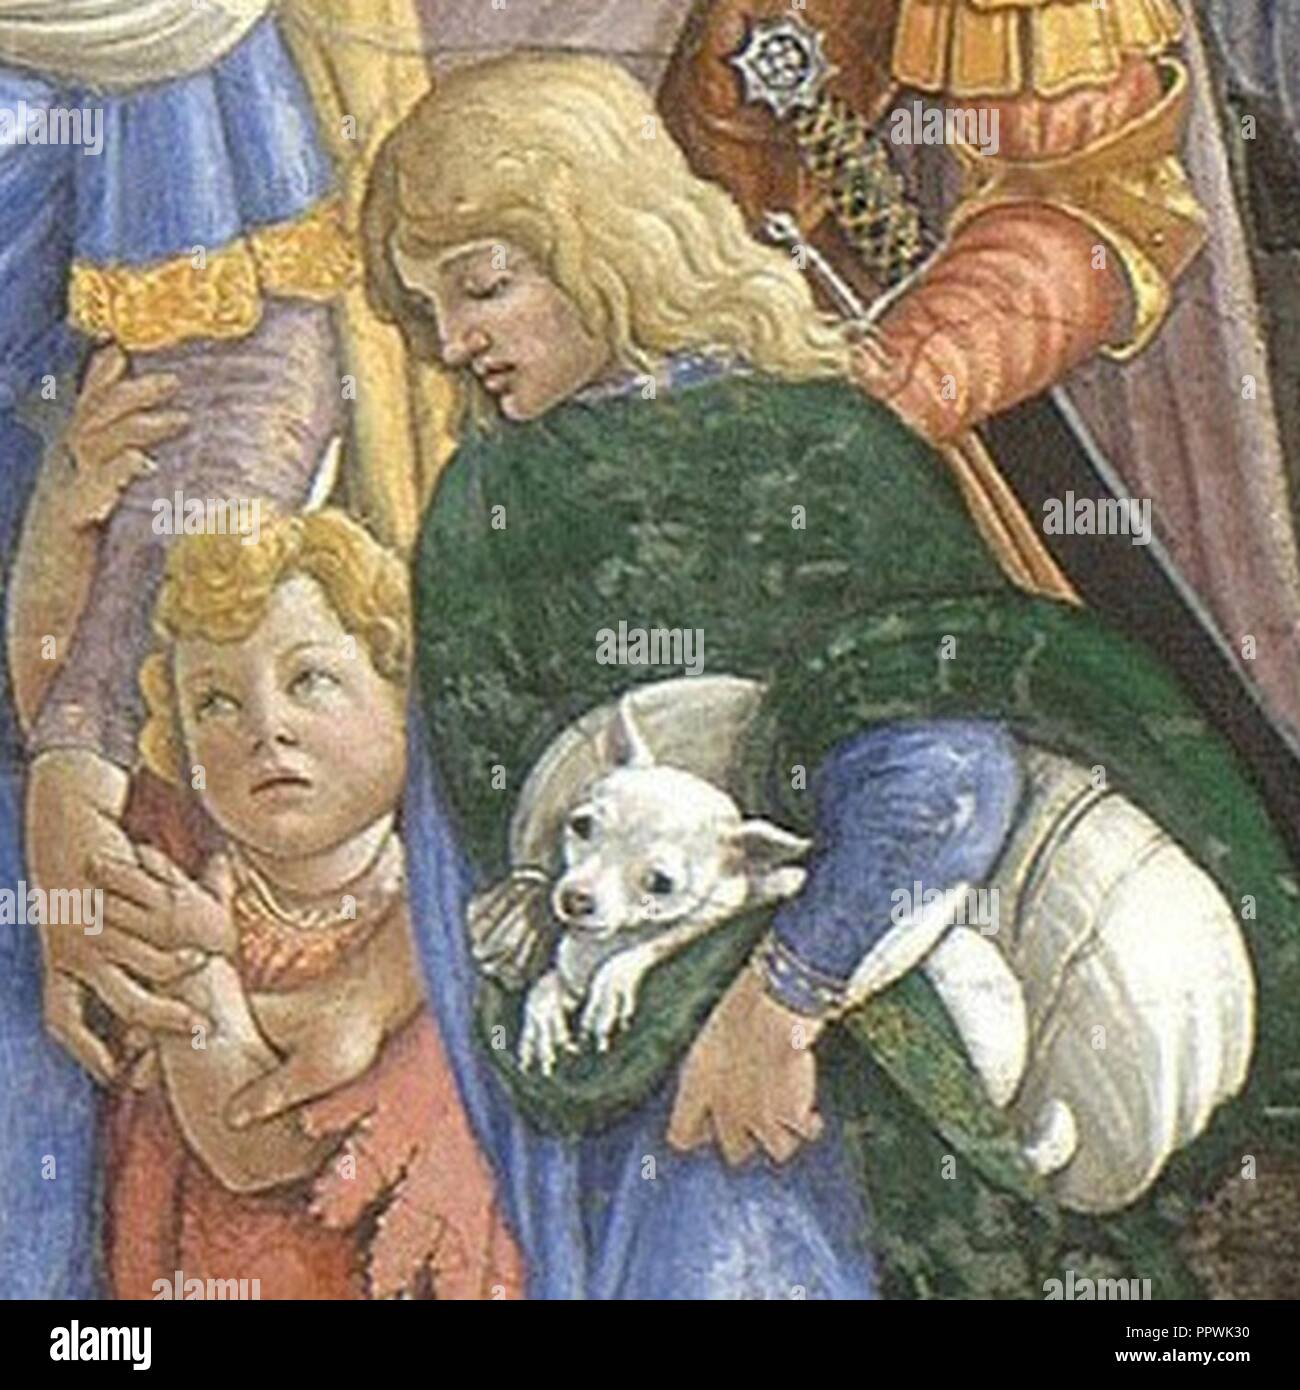 Botticelli Trials of Moses detail boy with dog. Stock Photo